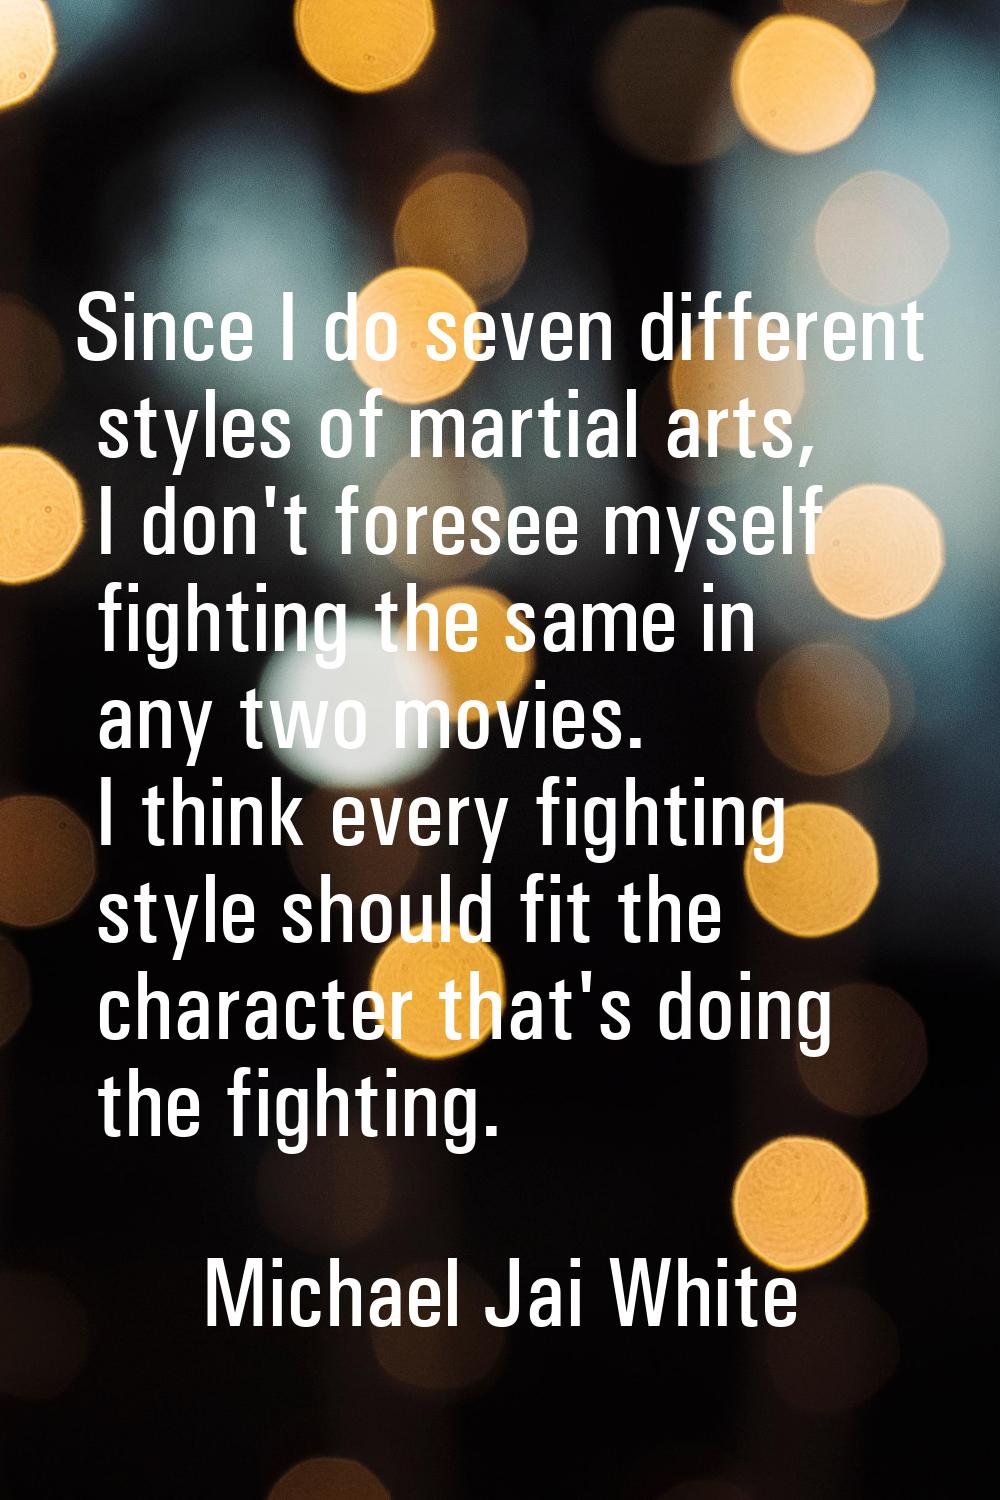 Since I do seven different styles of martial arts, I don't foresee myself fighting the same in any 